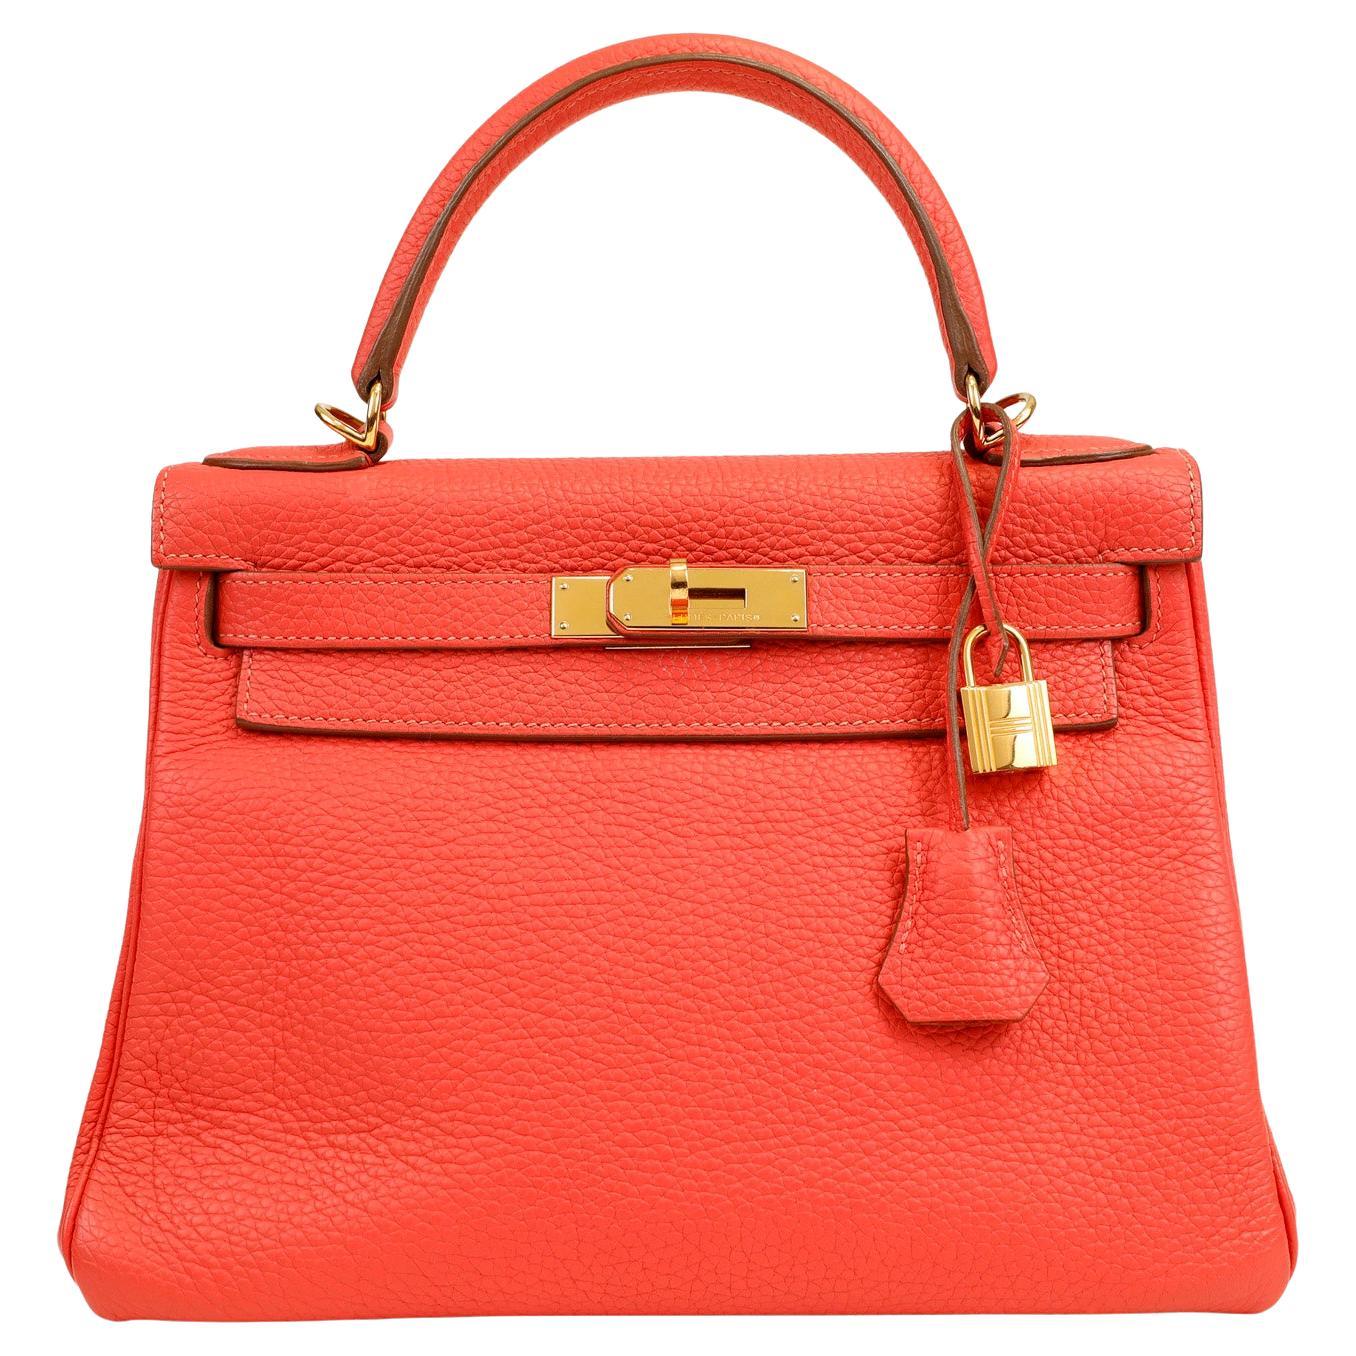 Hermès Red Togo Leather 28 cm Kelly with Gold Hardware